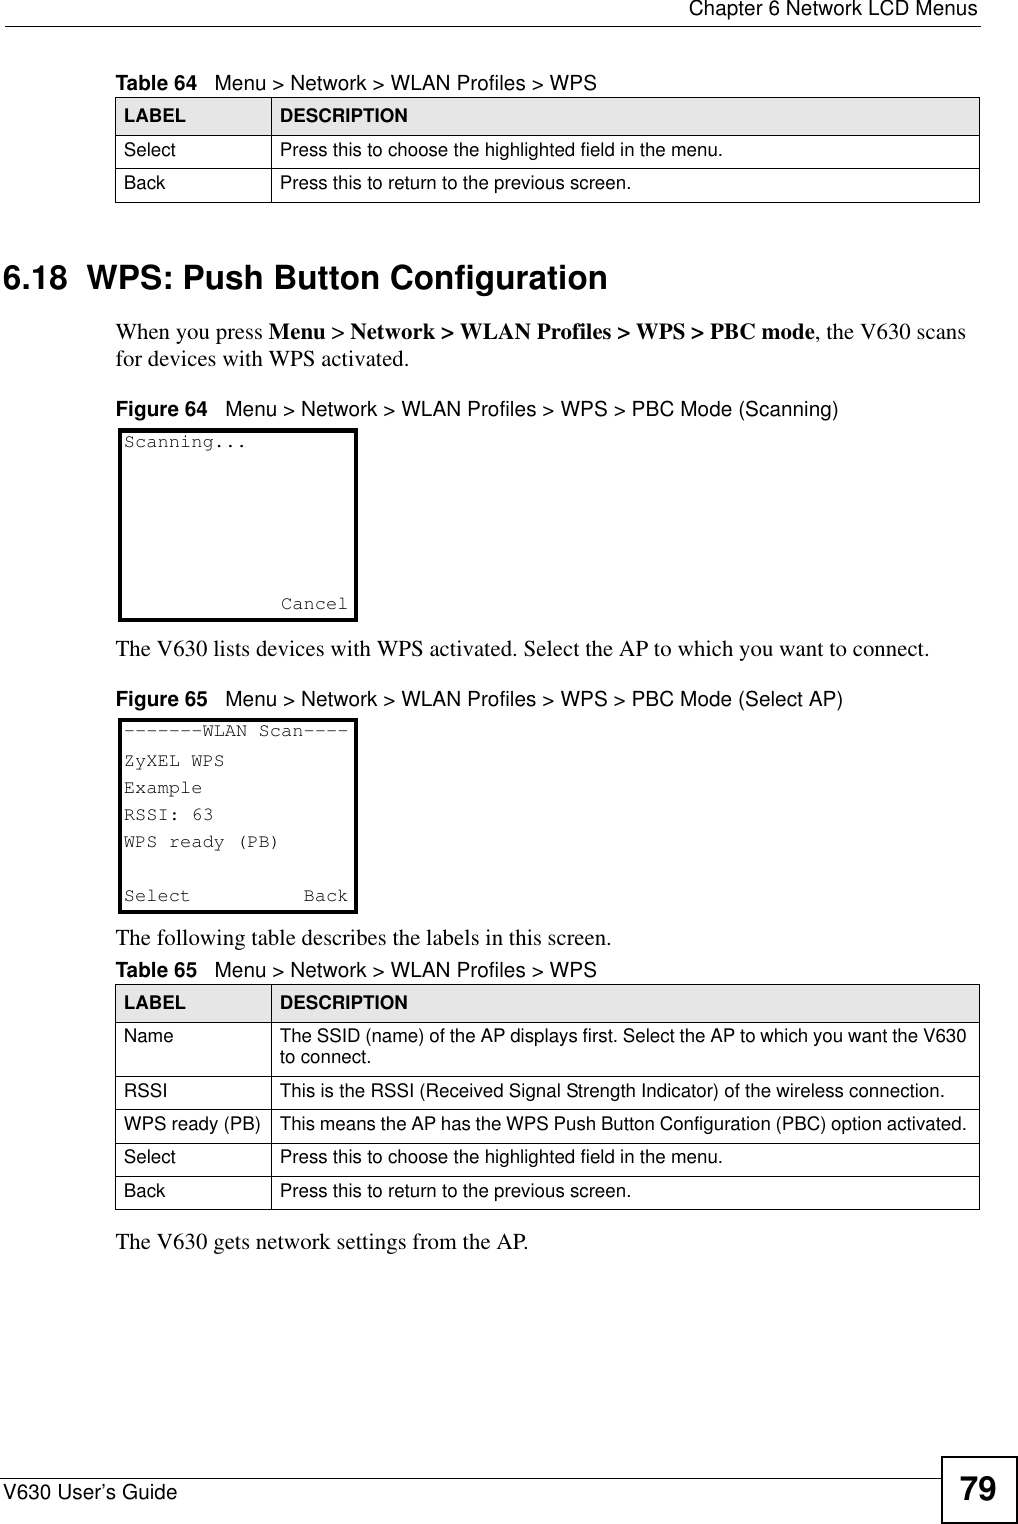  Chapter 6 Network LCD MenusV630 User’s Guide 796.18  WPS: Push Button ConfigurationWhen you press Menu &gt; Network &gt; WLAN Profiles &gt; WPS &gt; PBC mode, the V630 scans for devices with WPS activated. Figure 64   Menu &gt; Network &gt; WLAN Profiles &gt; WPS &gt; PBC Mode (Scanning)The V630 lists devices with WPS activated. Select the AP to which you want to connect.Figure 65   Menu &gt; Network &gt; WLAN Profiles &gt; WPS &gt; PBC Mode (Select AP)The following table describes the labels in this screen.The V630 gets network settings from the AP.Select Press this to choose the highlighted field in the menu.Back Press this to return to the previous screen.Table 64   Menu &gt; Network &gt; WLAN Profiles &gt; WPSLABEL DESCRIPTIONTable 65   Menu &gt; Network &gt; WLAN Profiles &gt; WPSLABEL DESCRIPTIONName The SSID (name) of the AP displays first. Select the AP to which you want the V630 to connect. RSSI This is the RSSI (Received Signal Strength Indicator) of the wireless connection.WPS ready (PB) This means the AP has the WPS Push Button Configuration (PBC) option activated. Select Press this to choose the highlighted field in the menu.Back Press this to return to the previous screen.Scanning...Cancel-------WLAN Scan----ZyXEL WPSExampleRSSI: 63WPS ready (PB)Select   Back